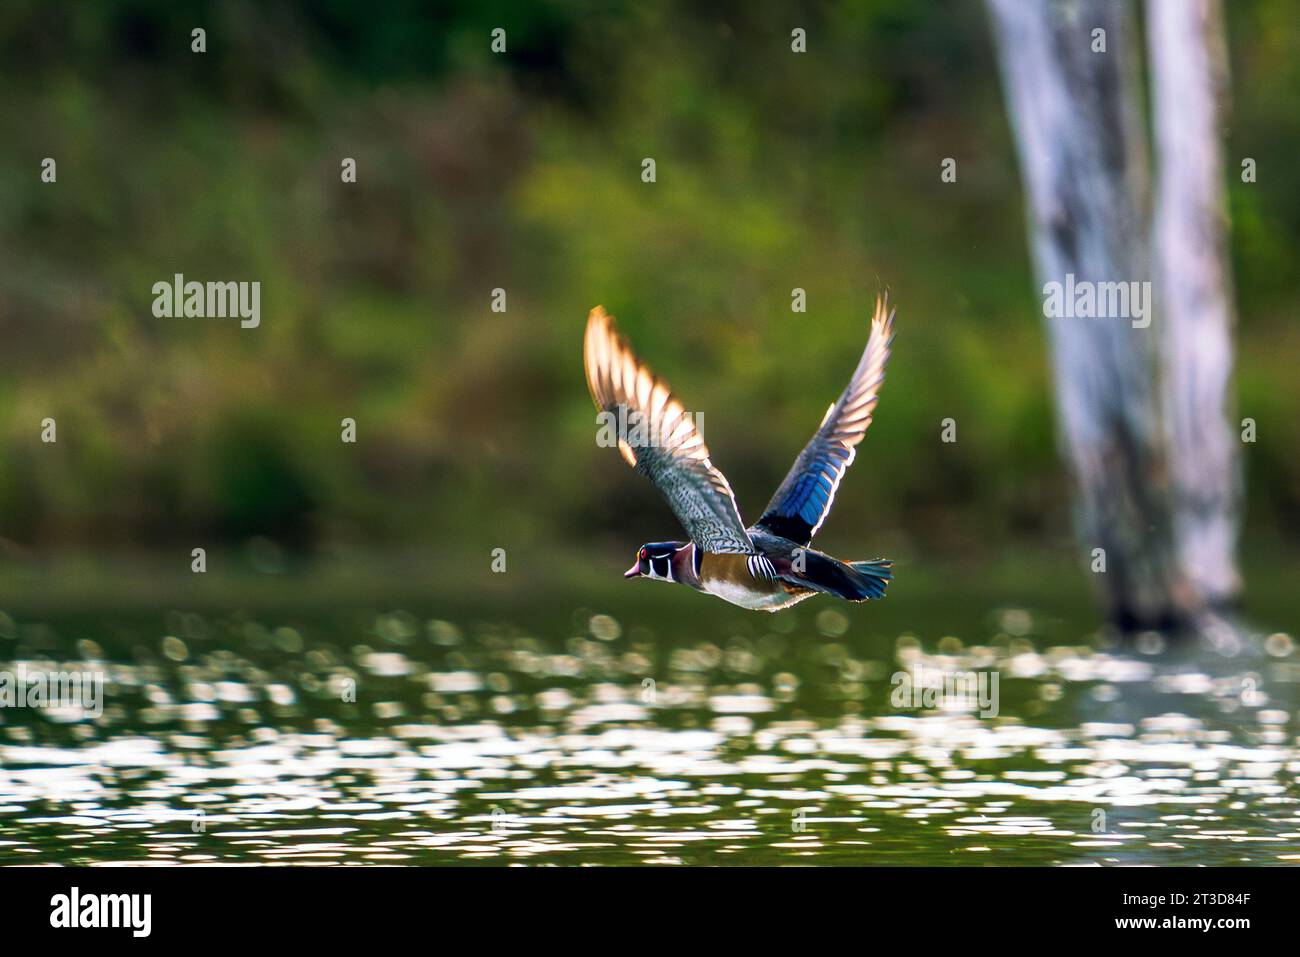 A drake flying low near the calm surface of a lake. Wood Ducks are medium-sized ducks that perch and nest in trees, usually near water. Stock Photo